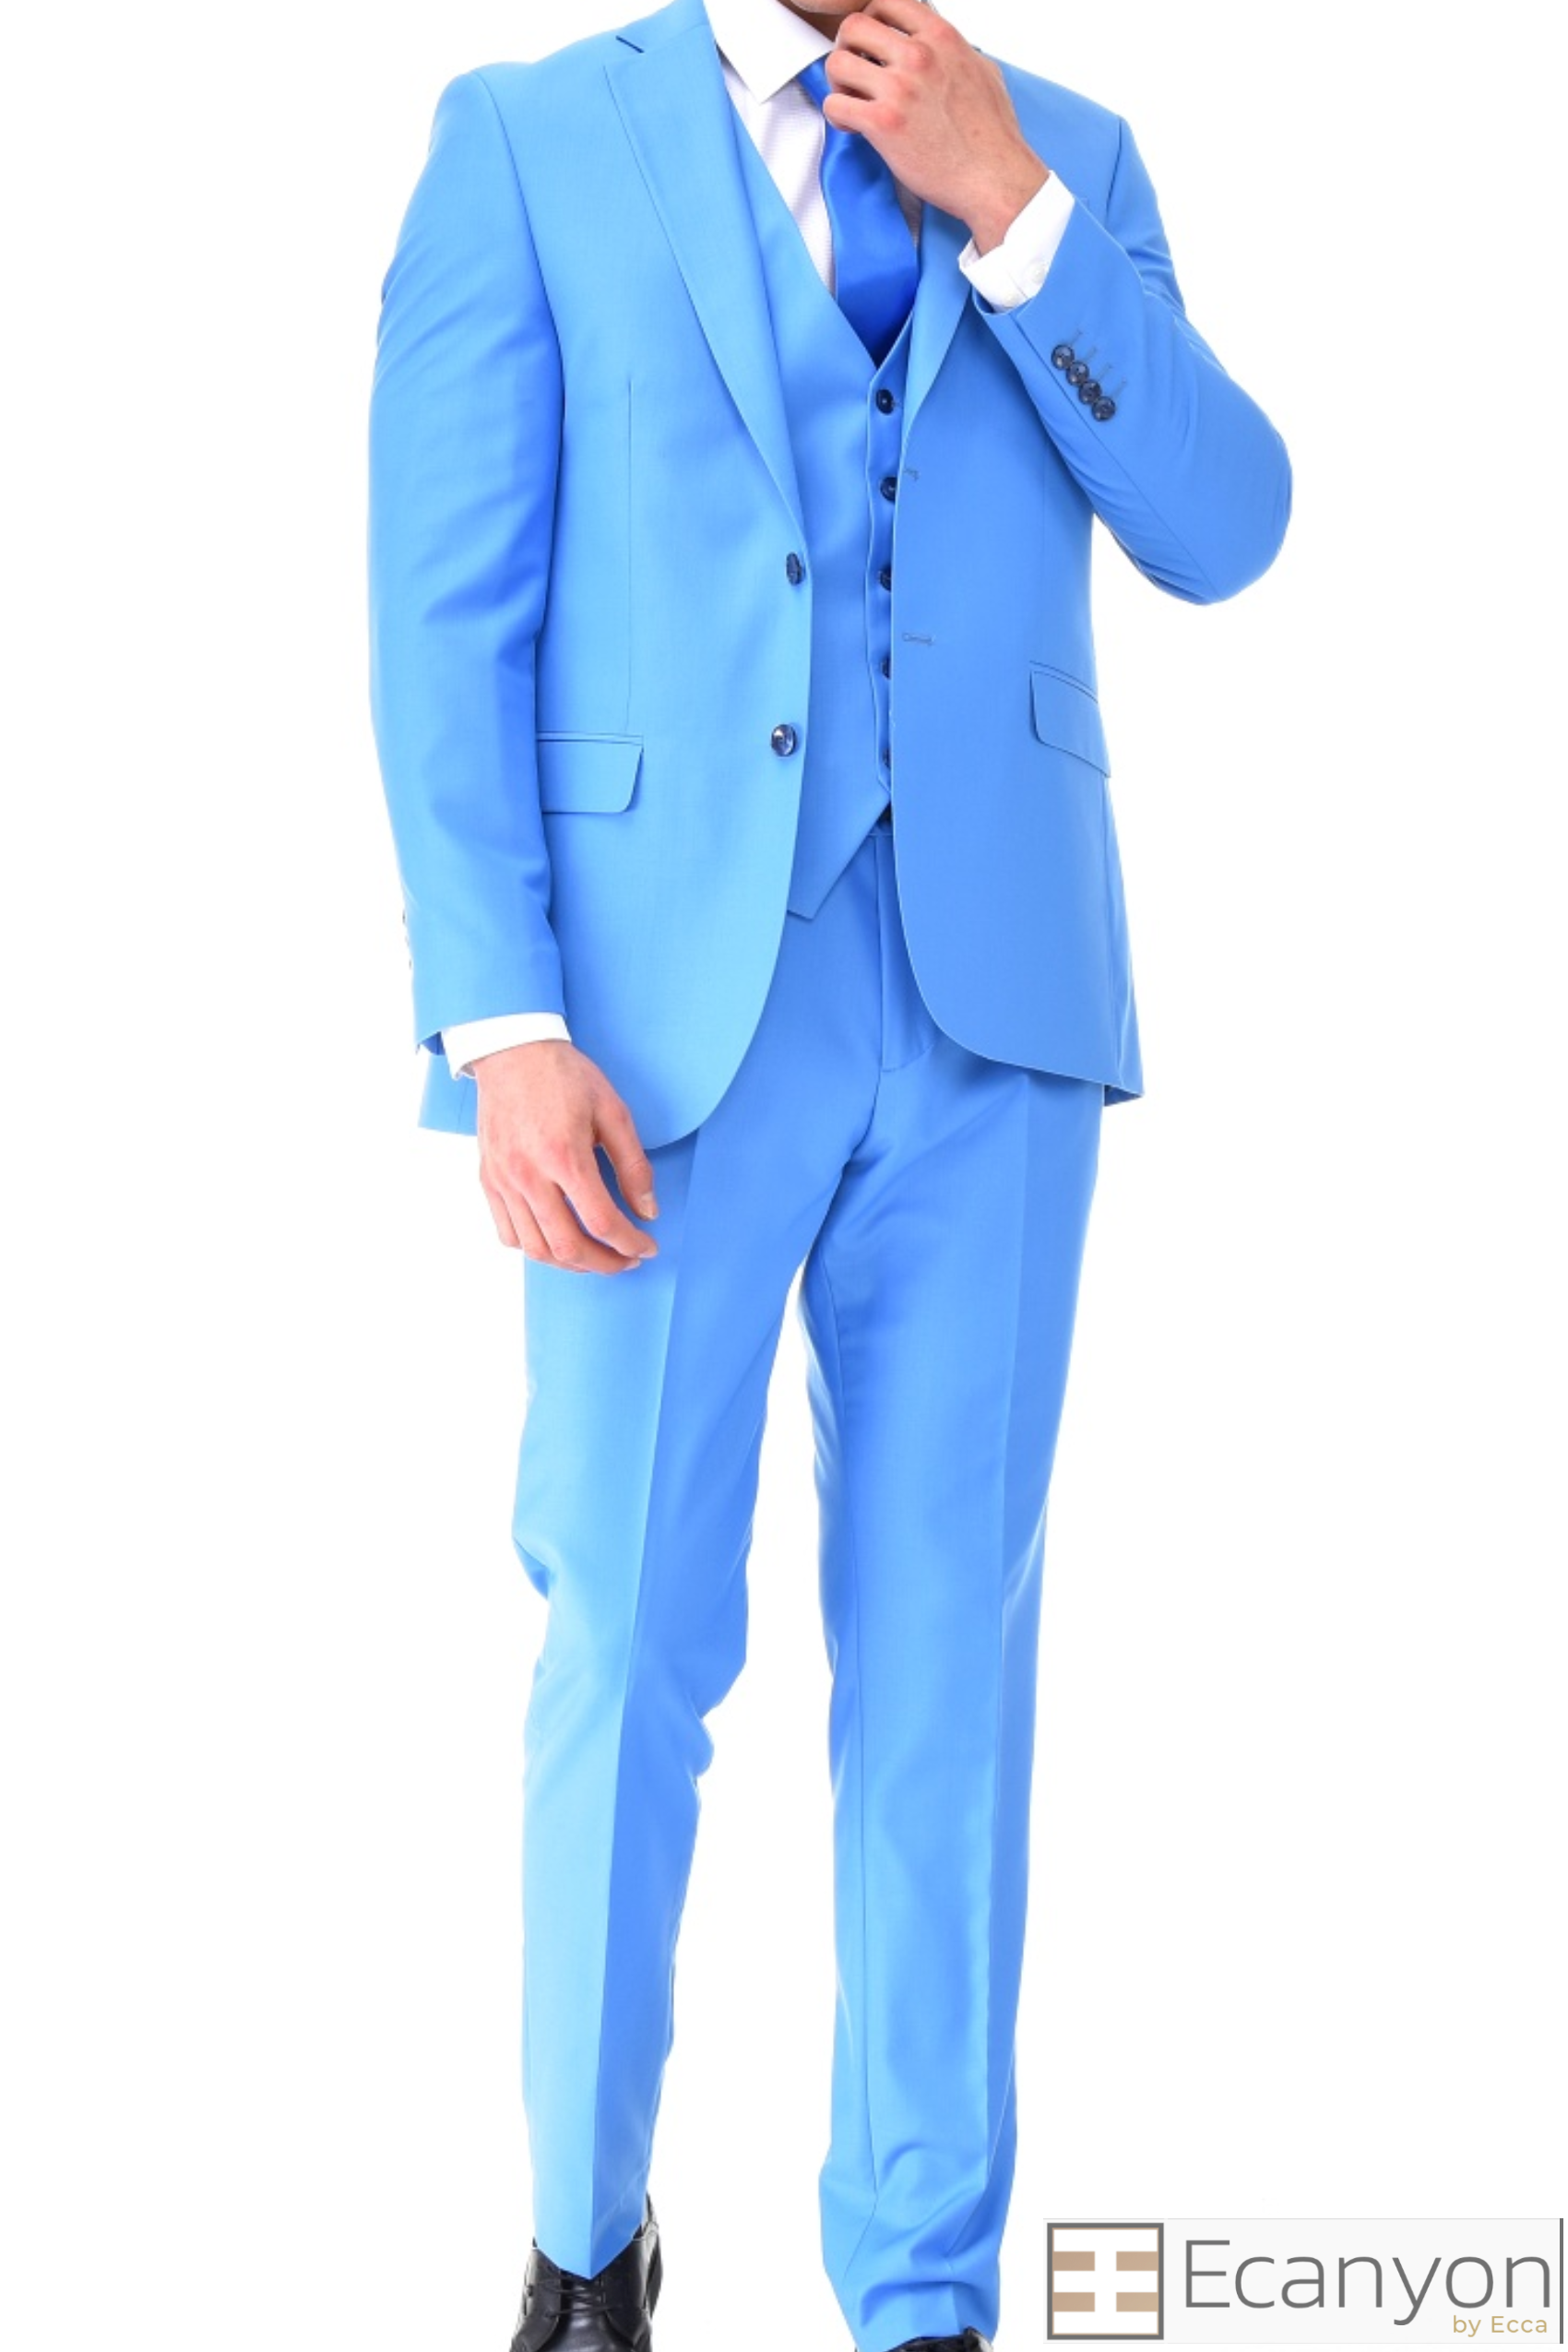 Sky Blue Plain Three Piece Suit, A timeless a plain sky blue three piece suits that can be styled up for special events or styled down for the office. The matching quality a plain sky blue waistcoat and trousers are paired with a plain sky blue suit jacket. You’ll love the patterned lining panels on this suit, especially the one in the jacket’s breast pocket which doubles up as a pocket square.Master Tailored Fit 3 Piece Suit